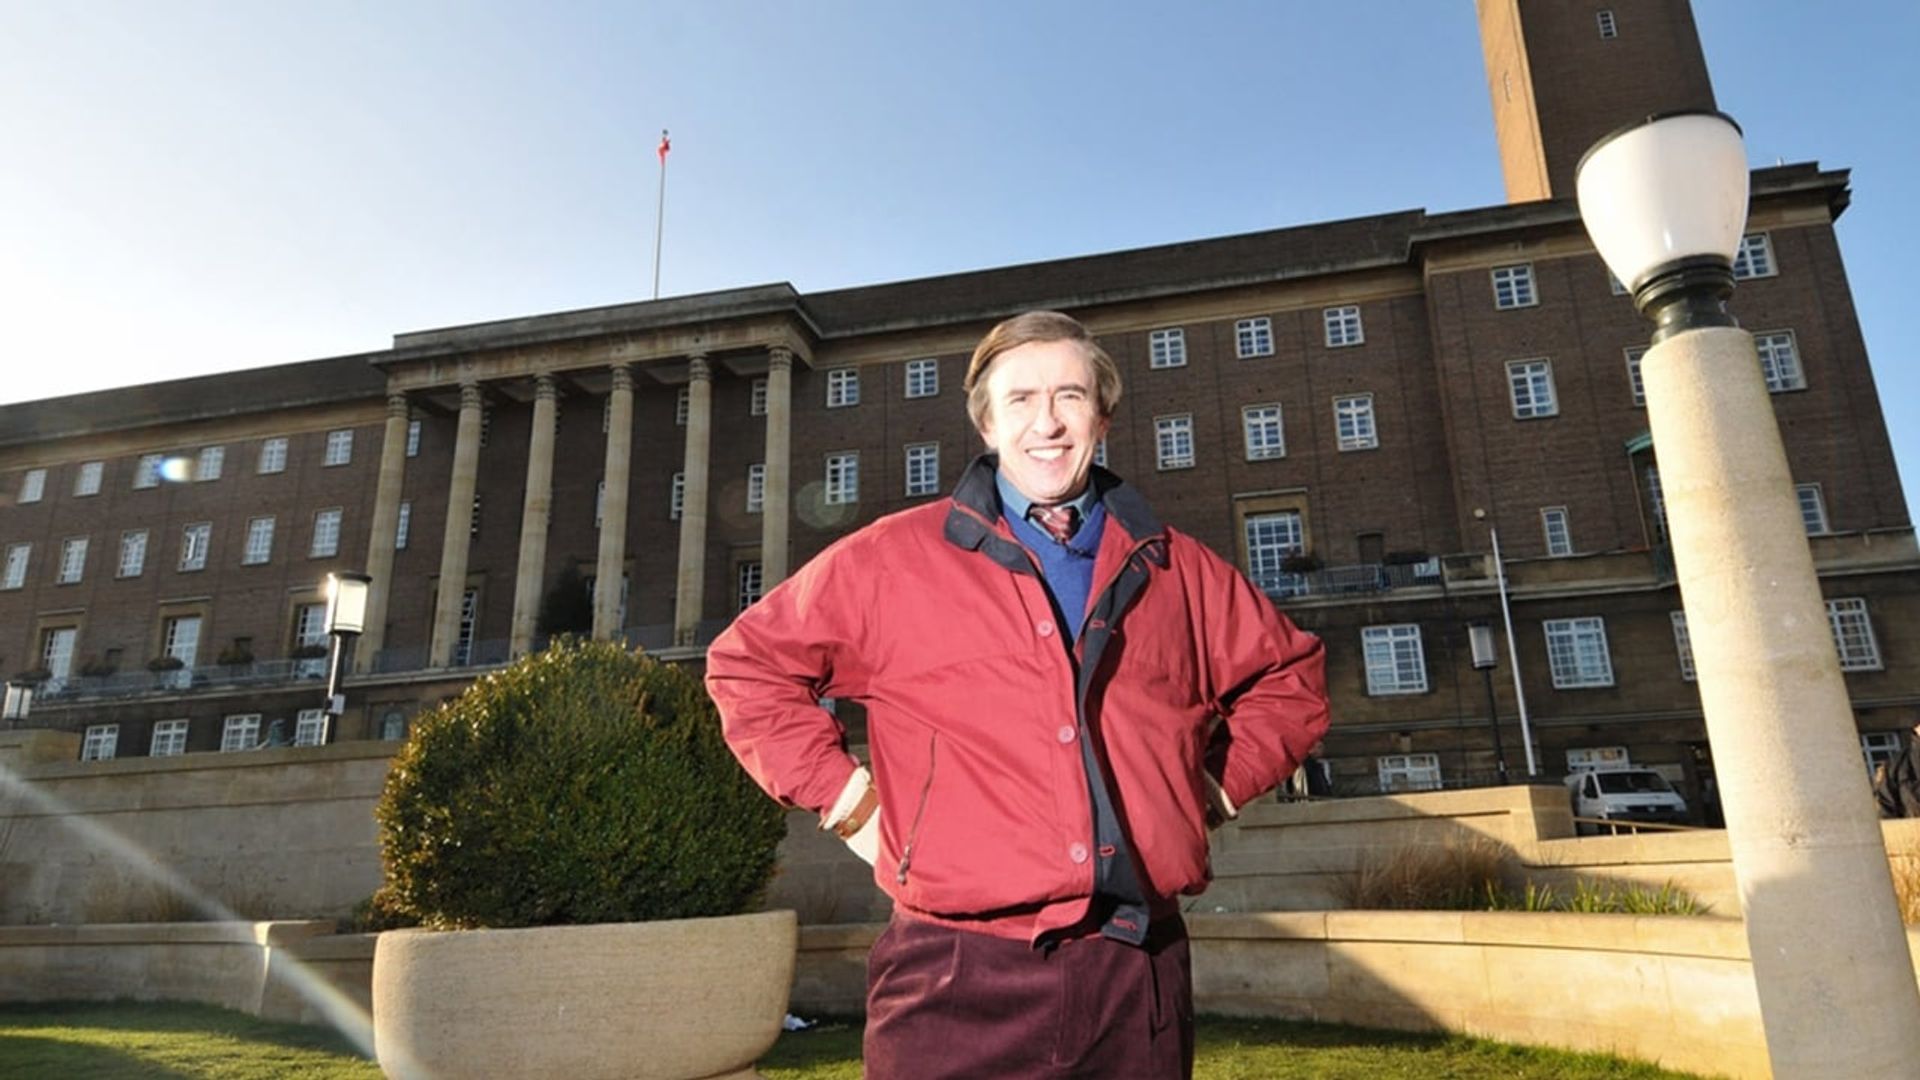 Alan Partridge: Welcome to the Places of My Life background